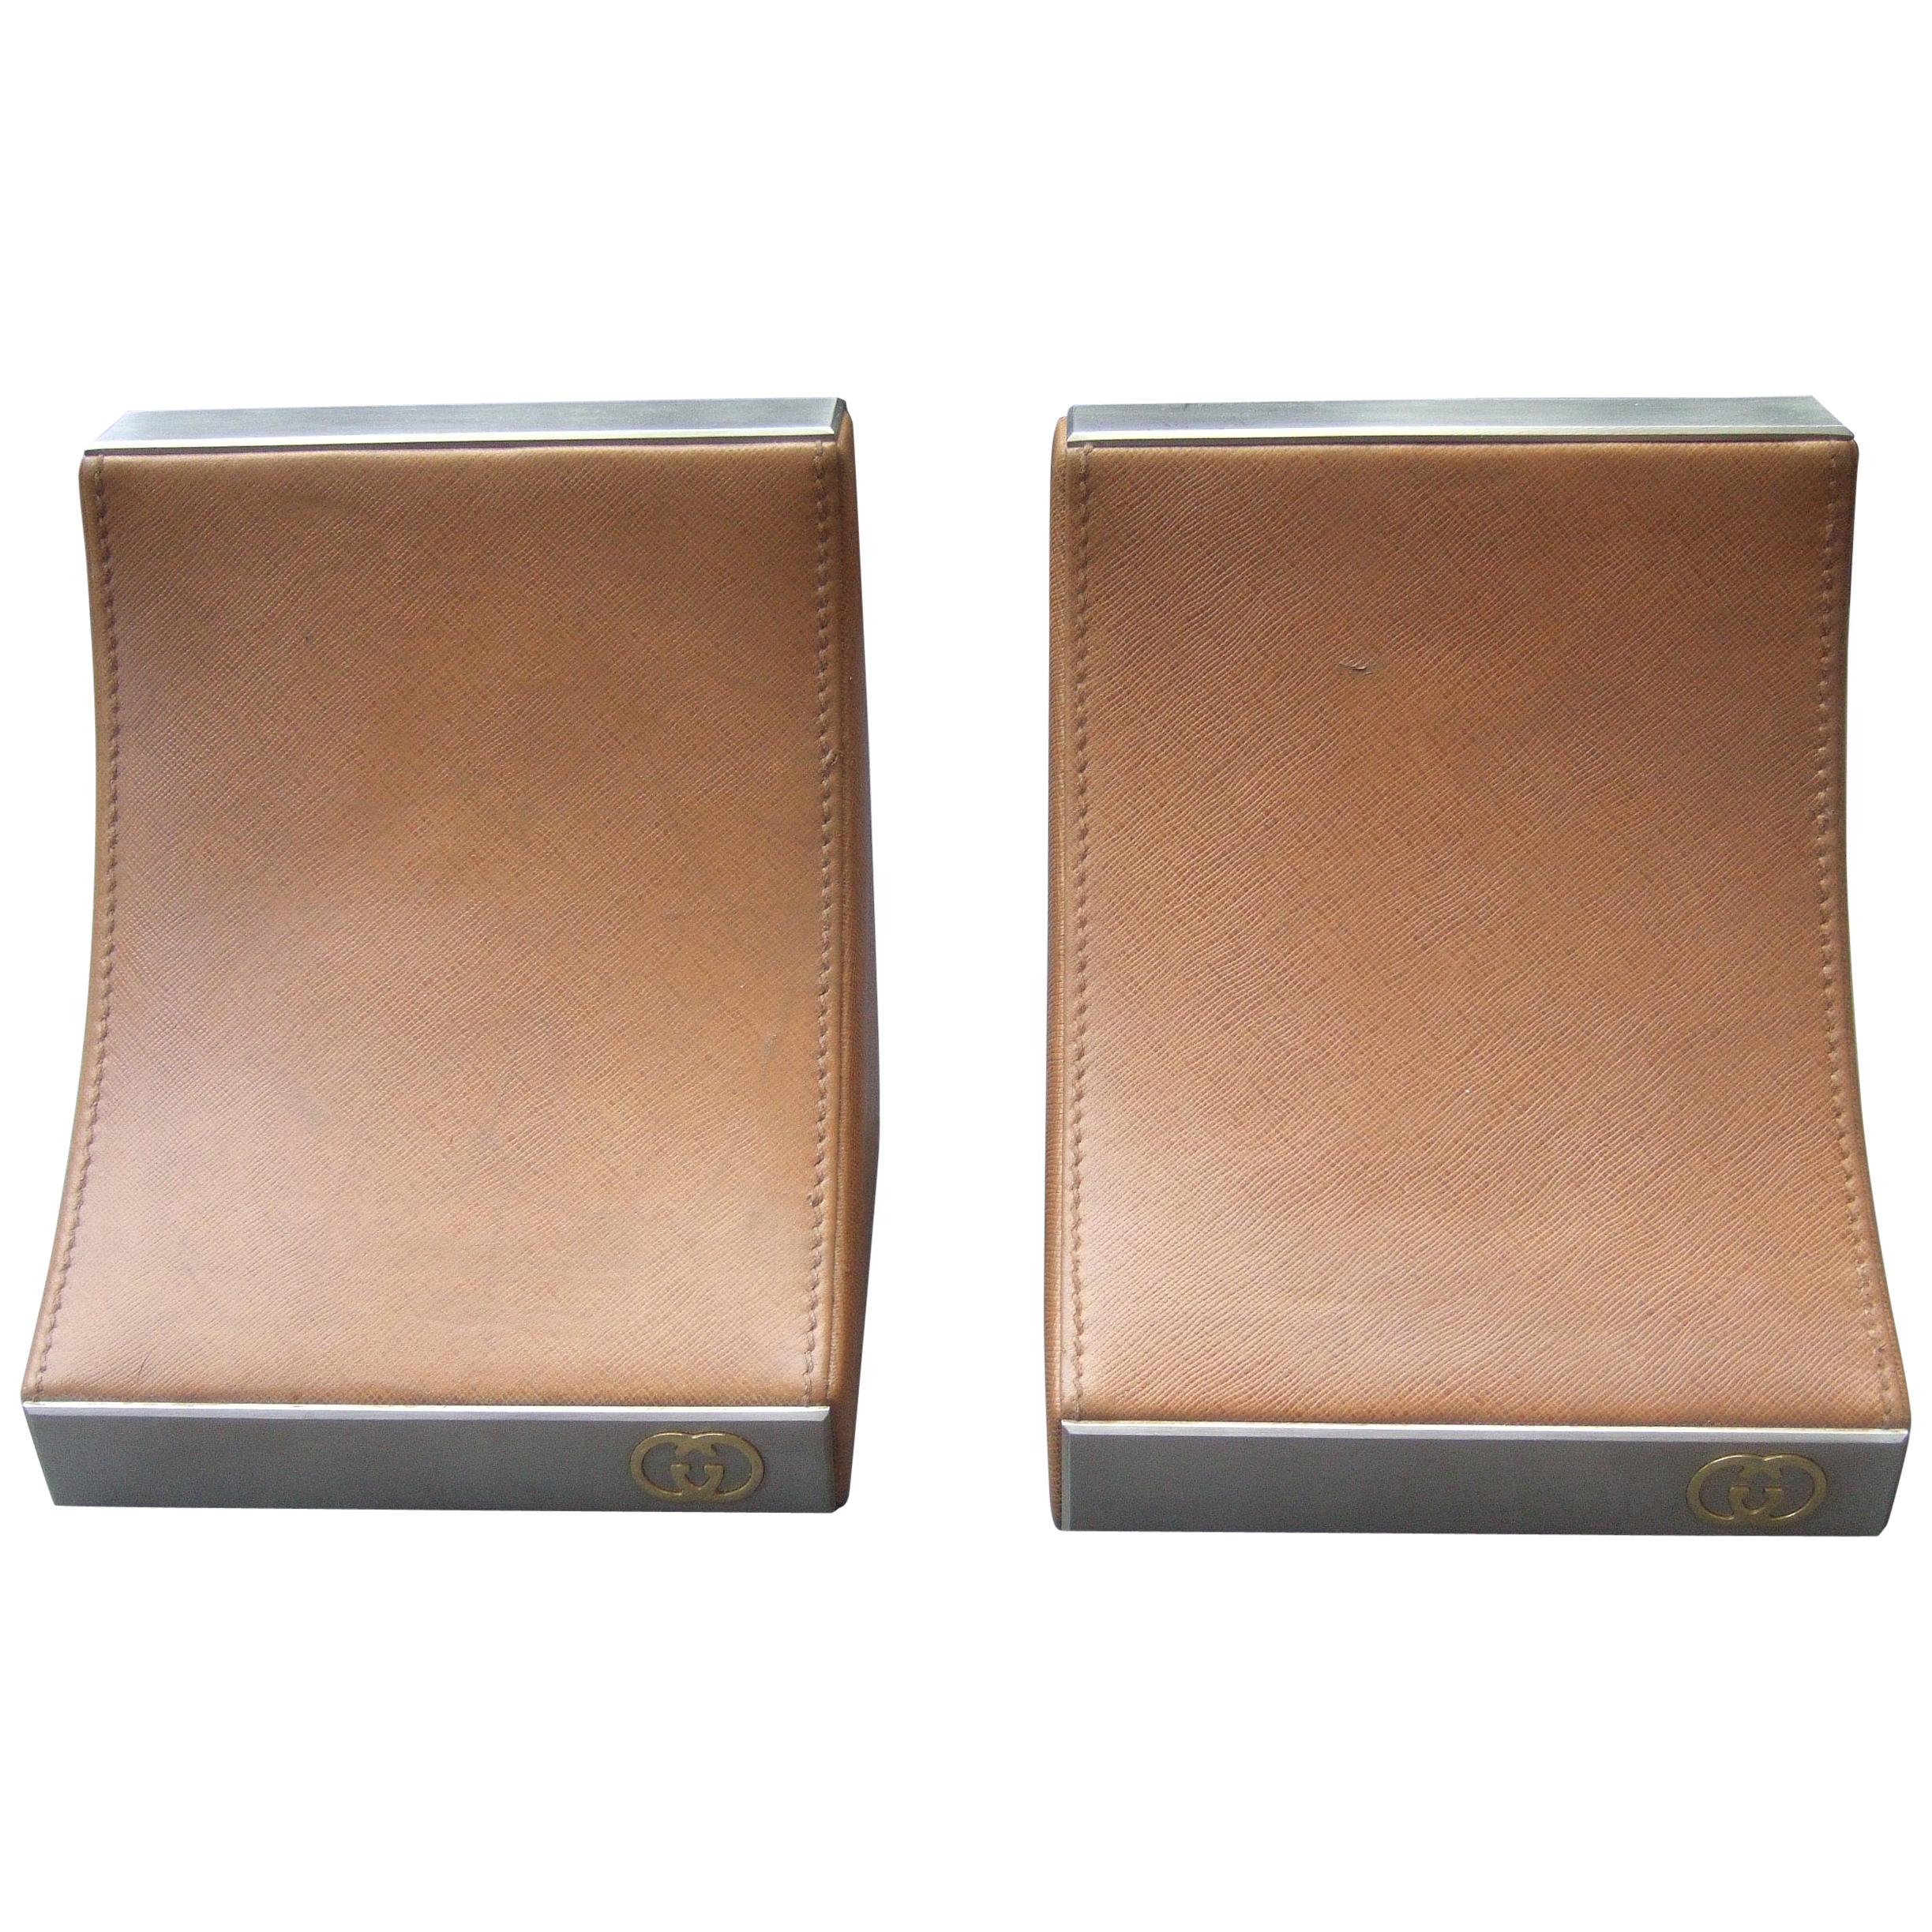 Gucci Italy Rare Caramel Brown Leather Pair of Bookends c 1970s 